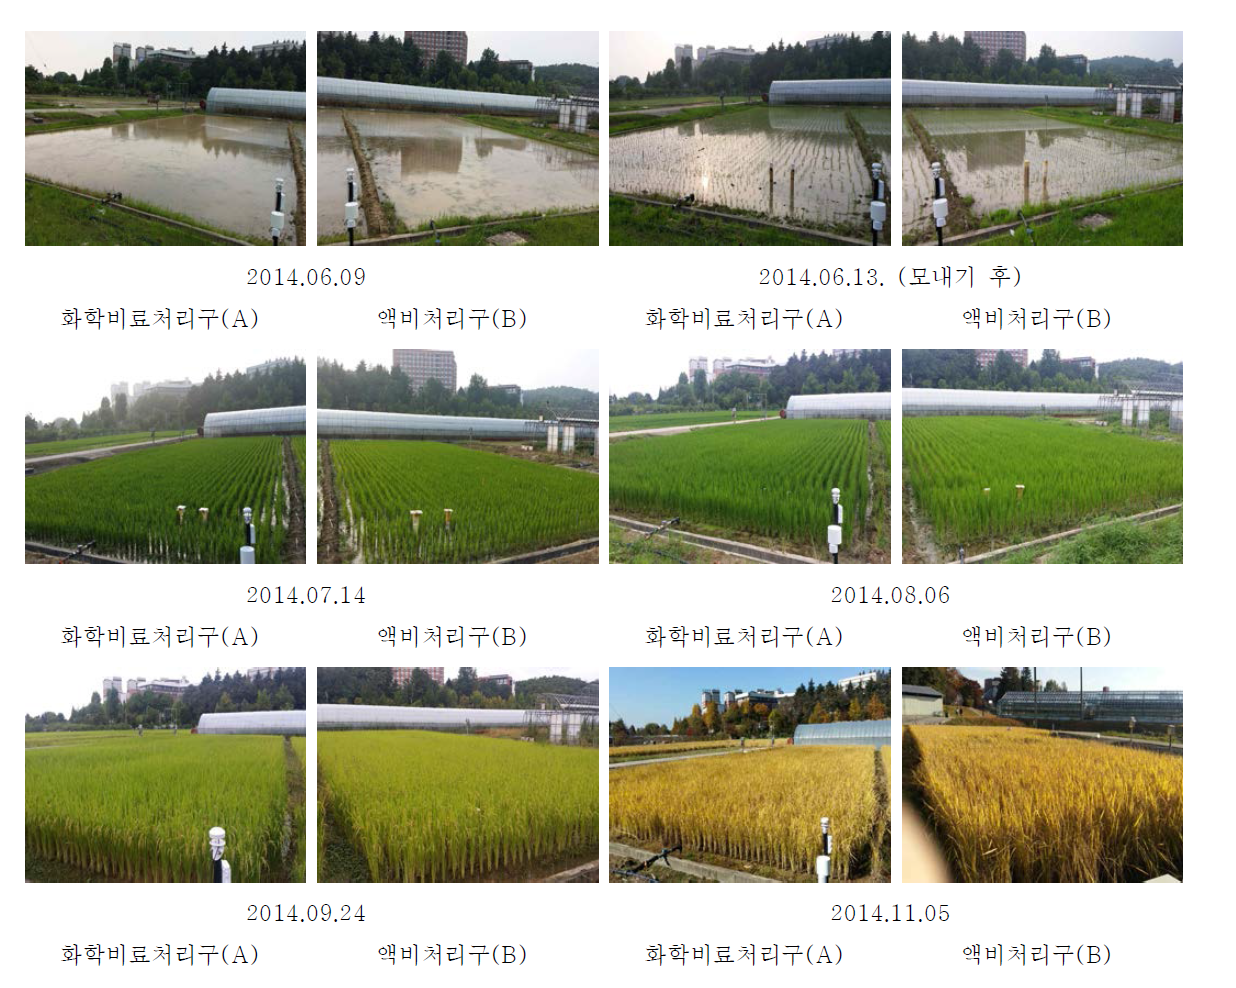 The view of agricultural activities at each treatment during 2014 cropping season